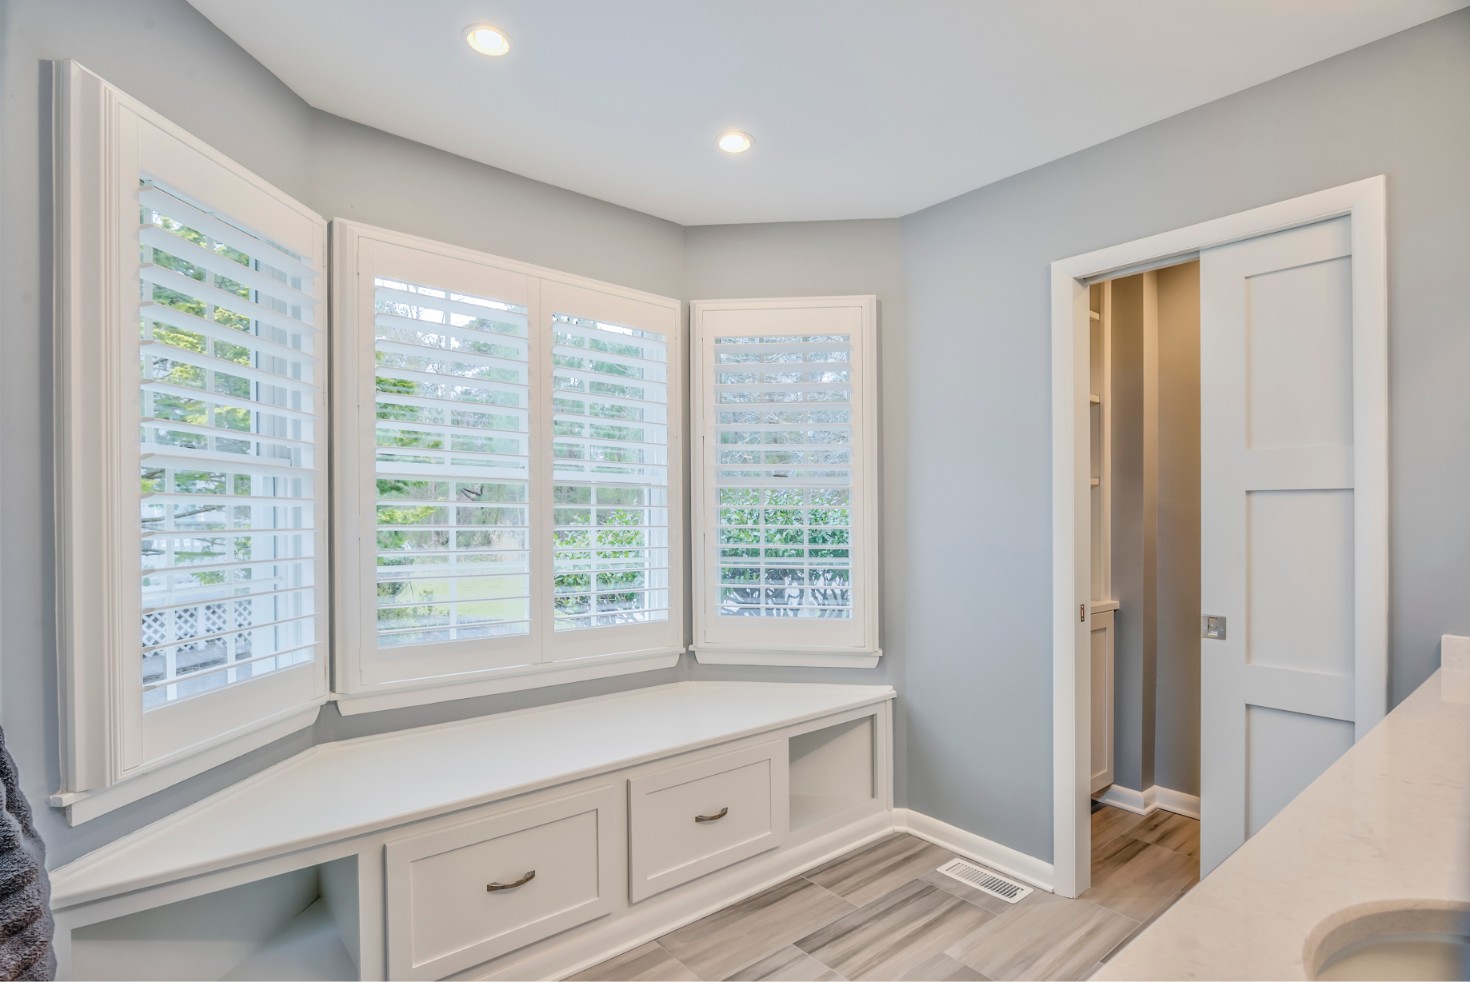 Canal Way Bathroom Remodel in Bethany Beach DE with Window Side Bench Seat